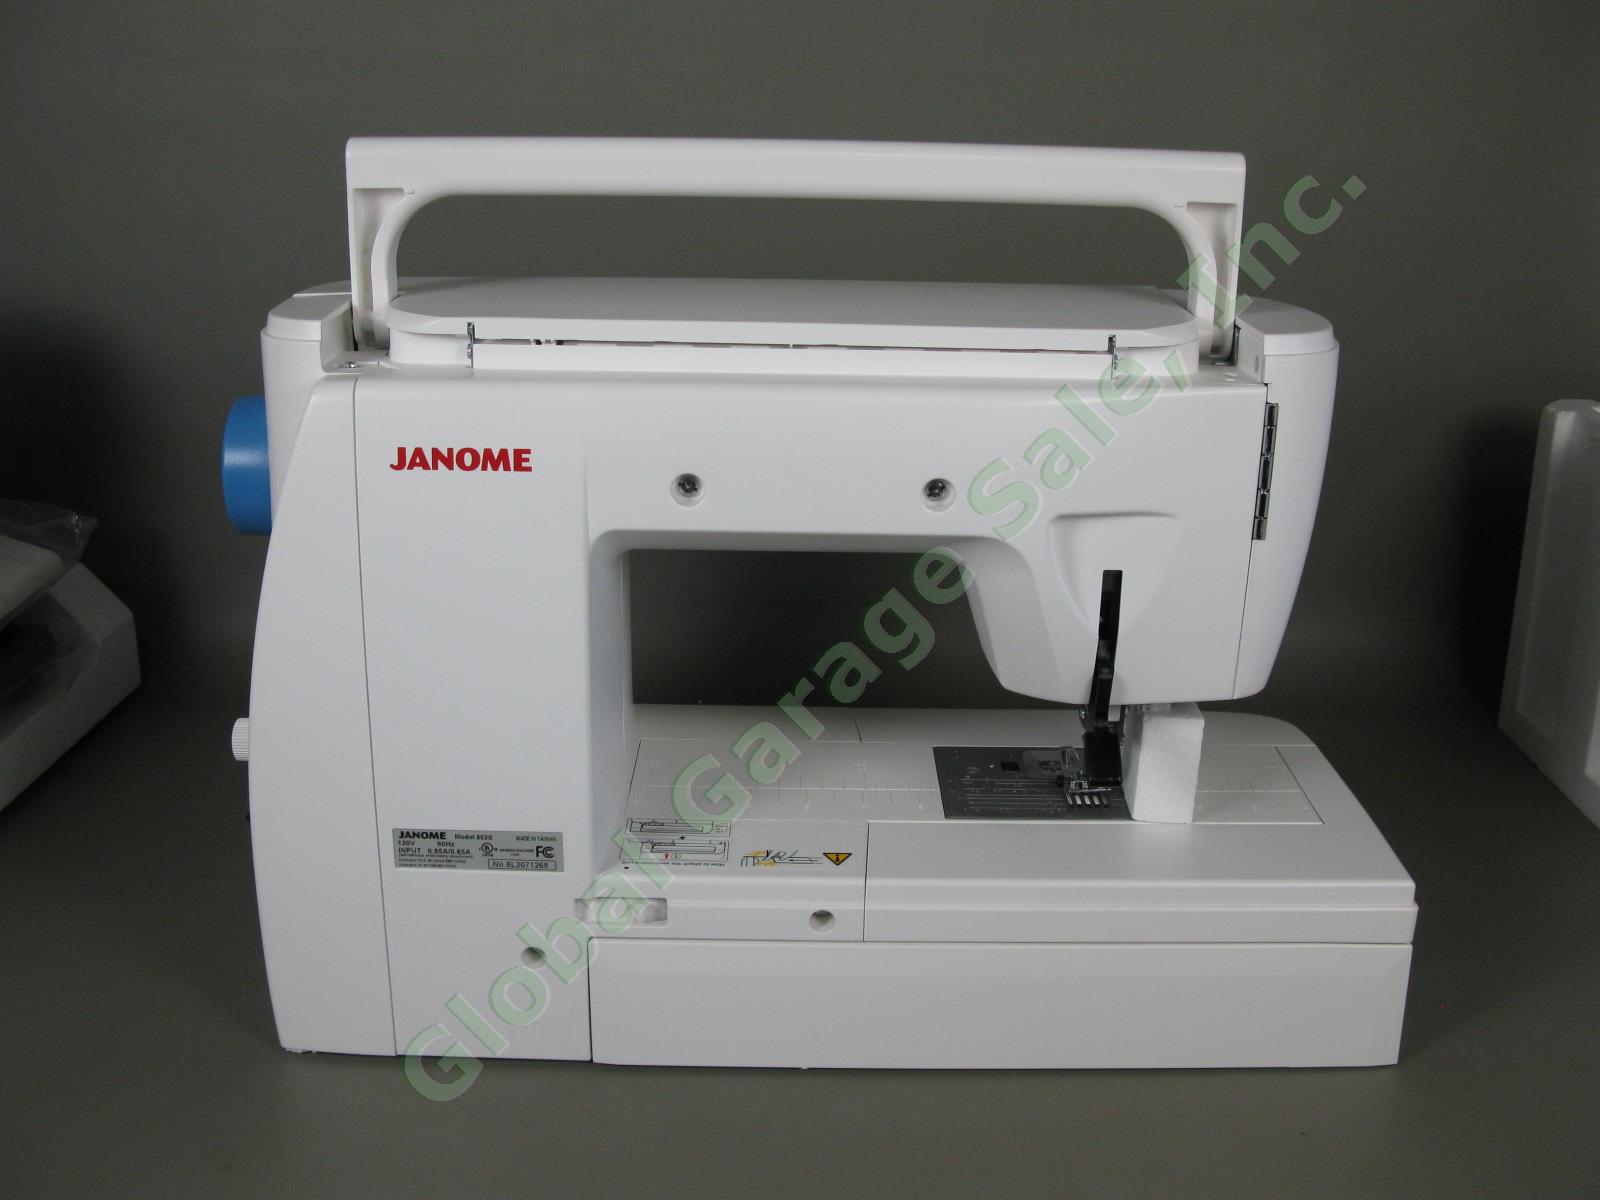 Janome Skyline S9 Sewing + Embroidery Machine Mint Condition! Barely Used! 3